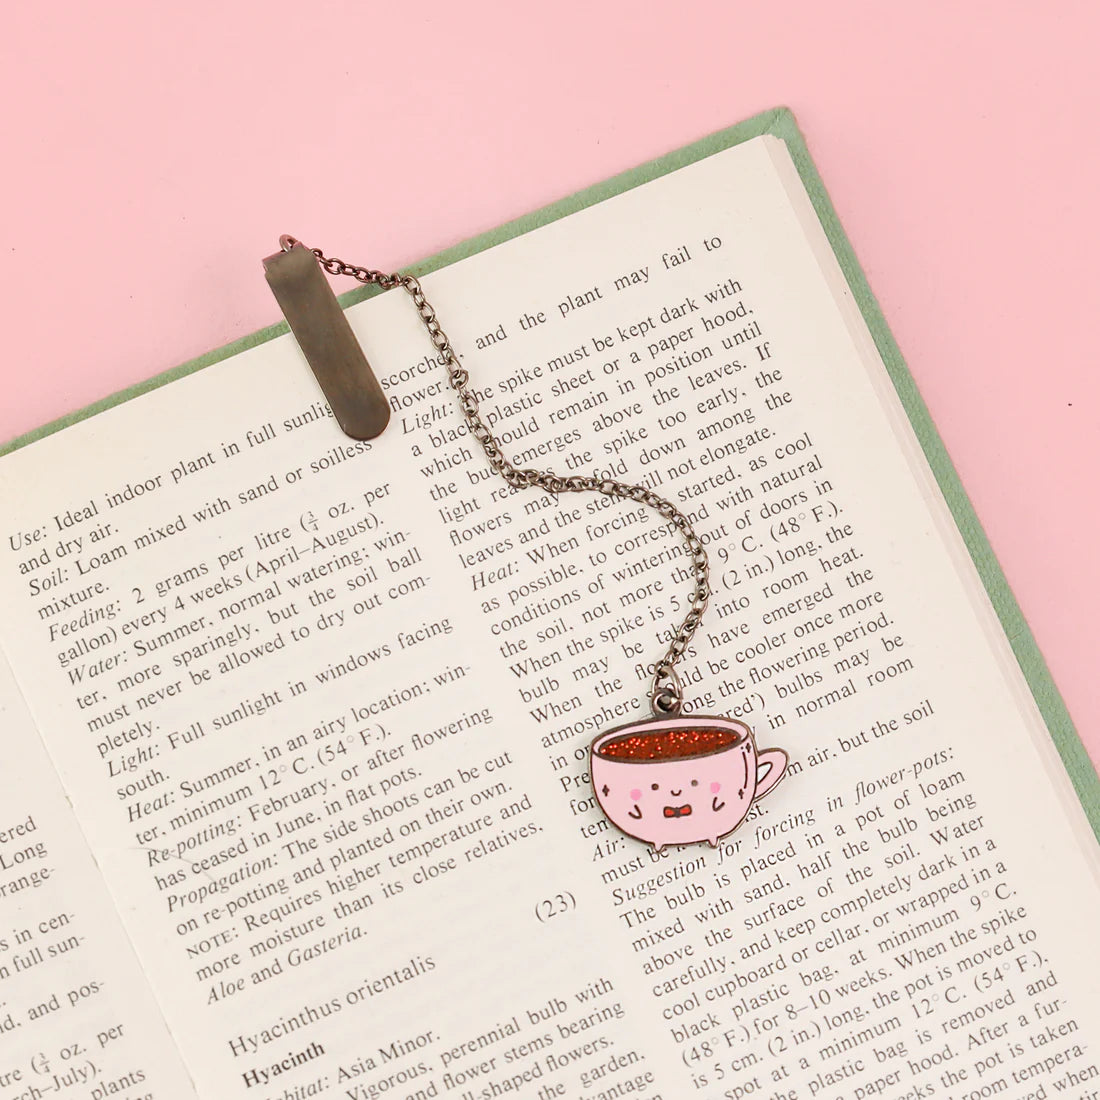 Fluffmallow Cute Chained BOOKMARKS